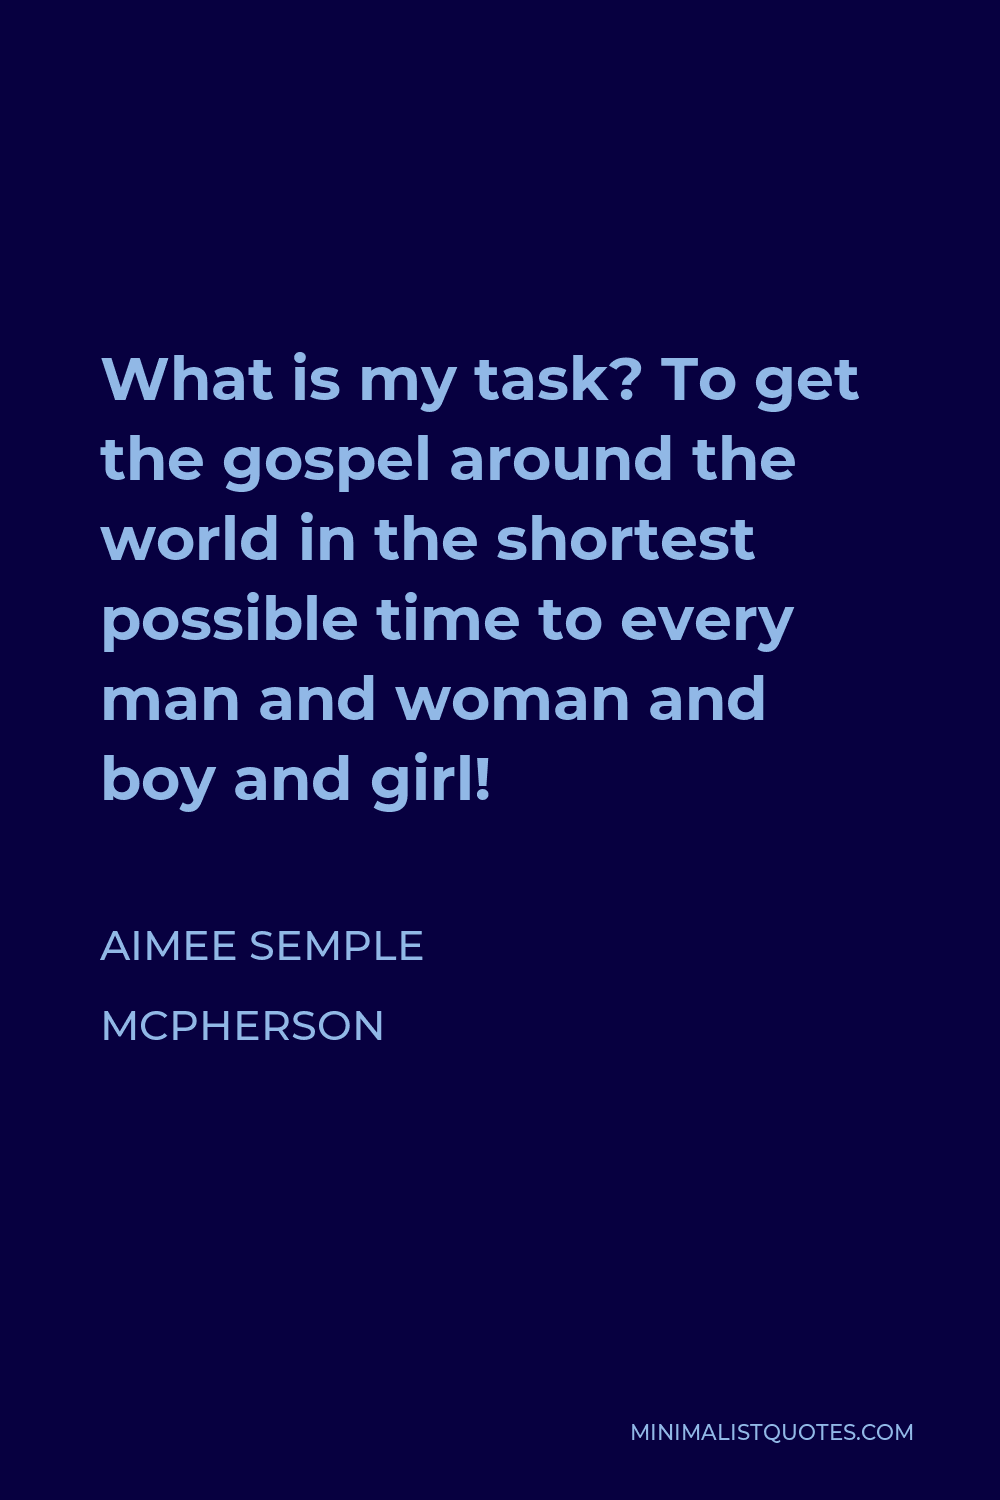 Aimee Semple McPherson Quote - What is my task? To get the gospel around the world in the shortest possible time to every man and woman and boy and girl!